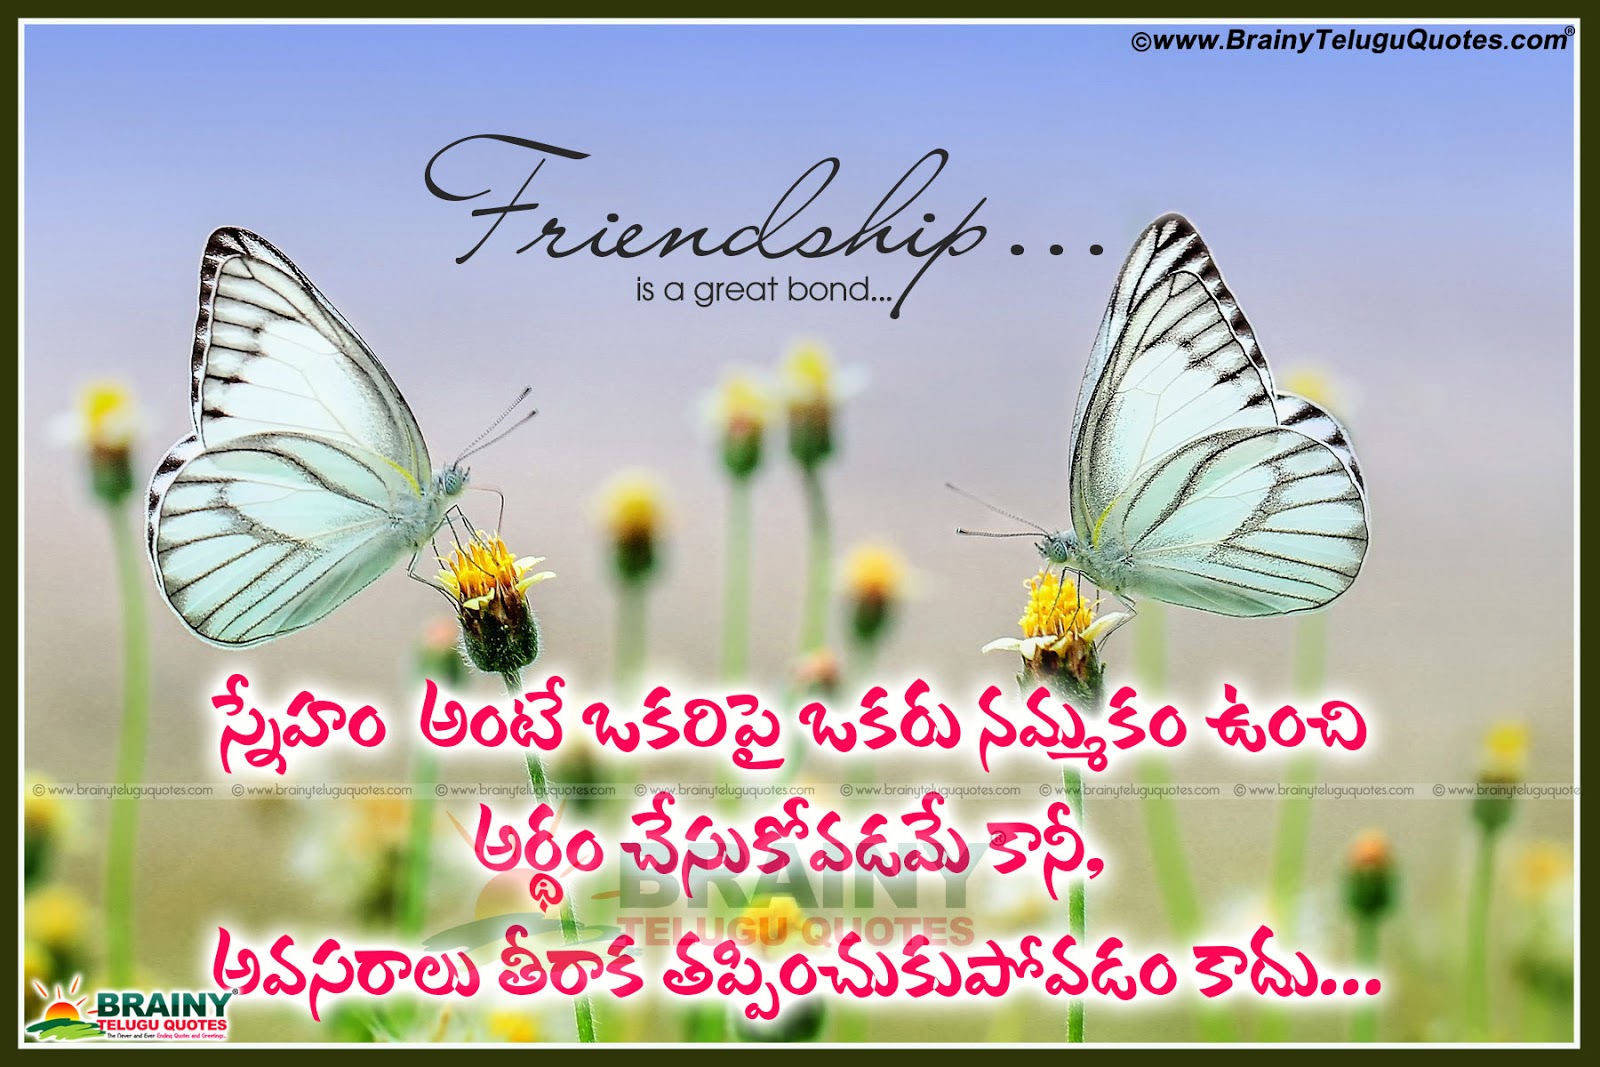 nice wallpapers of friendship,butterfly,insect,moths and butterflies,invertebrate,pollinator